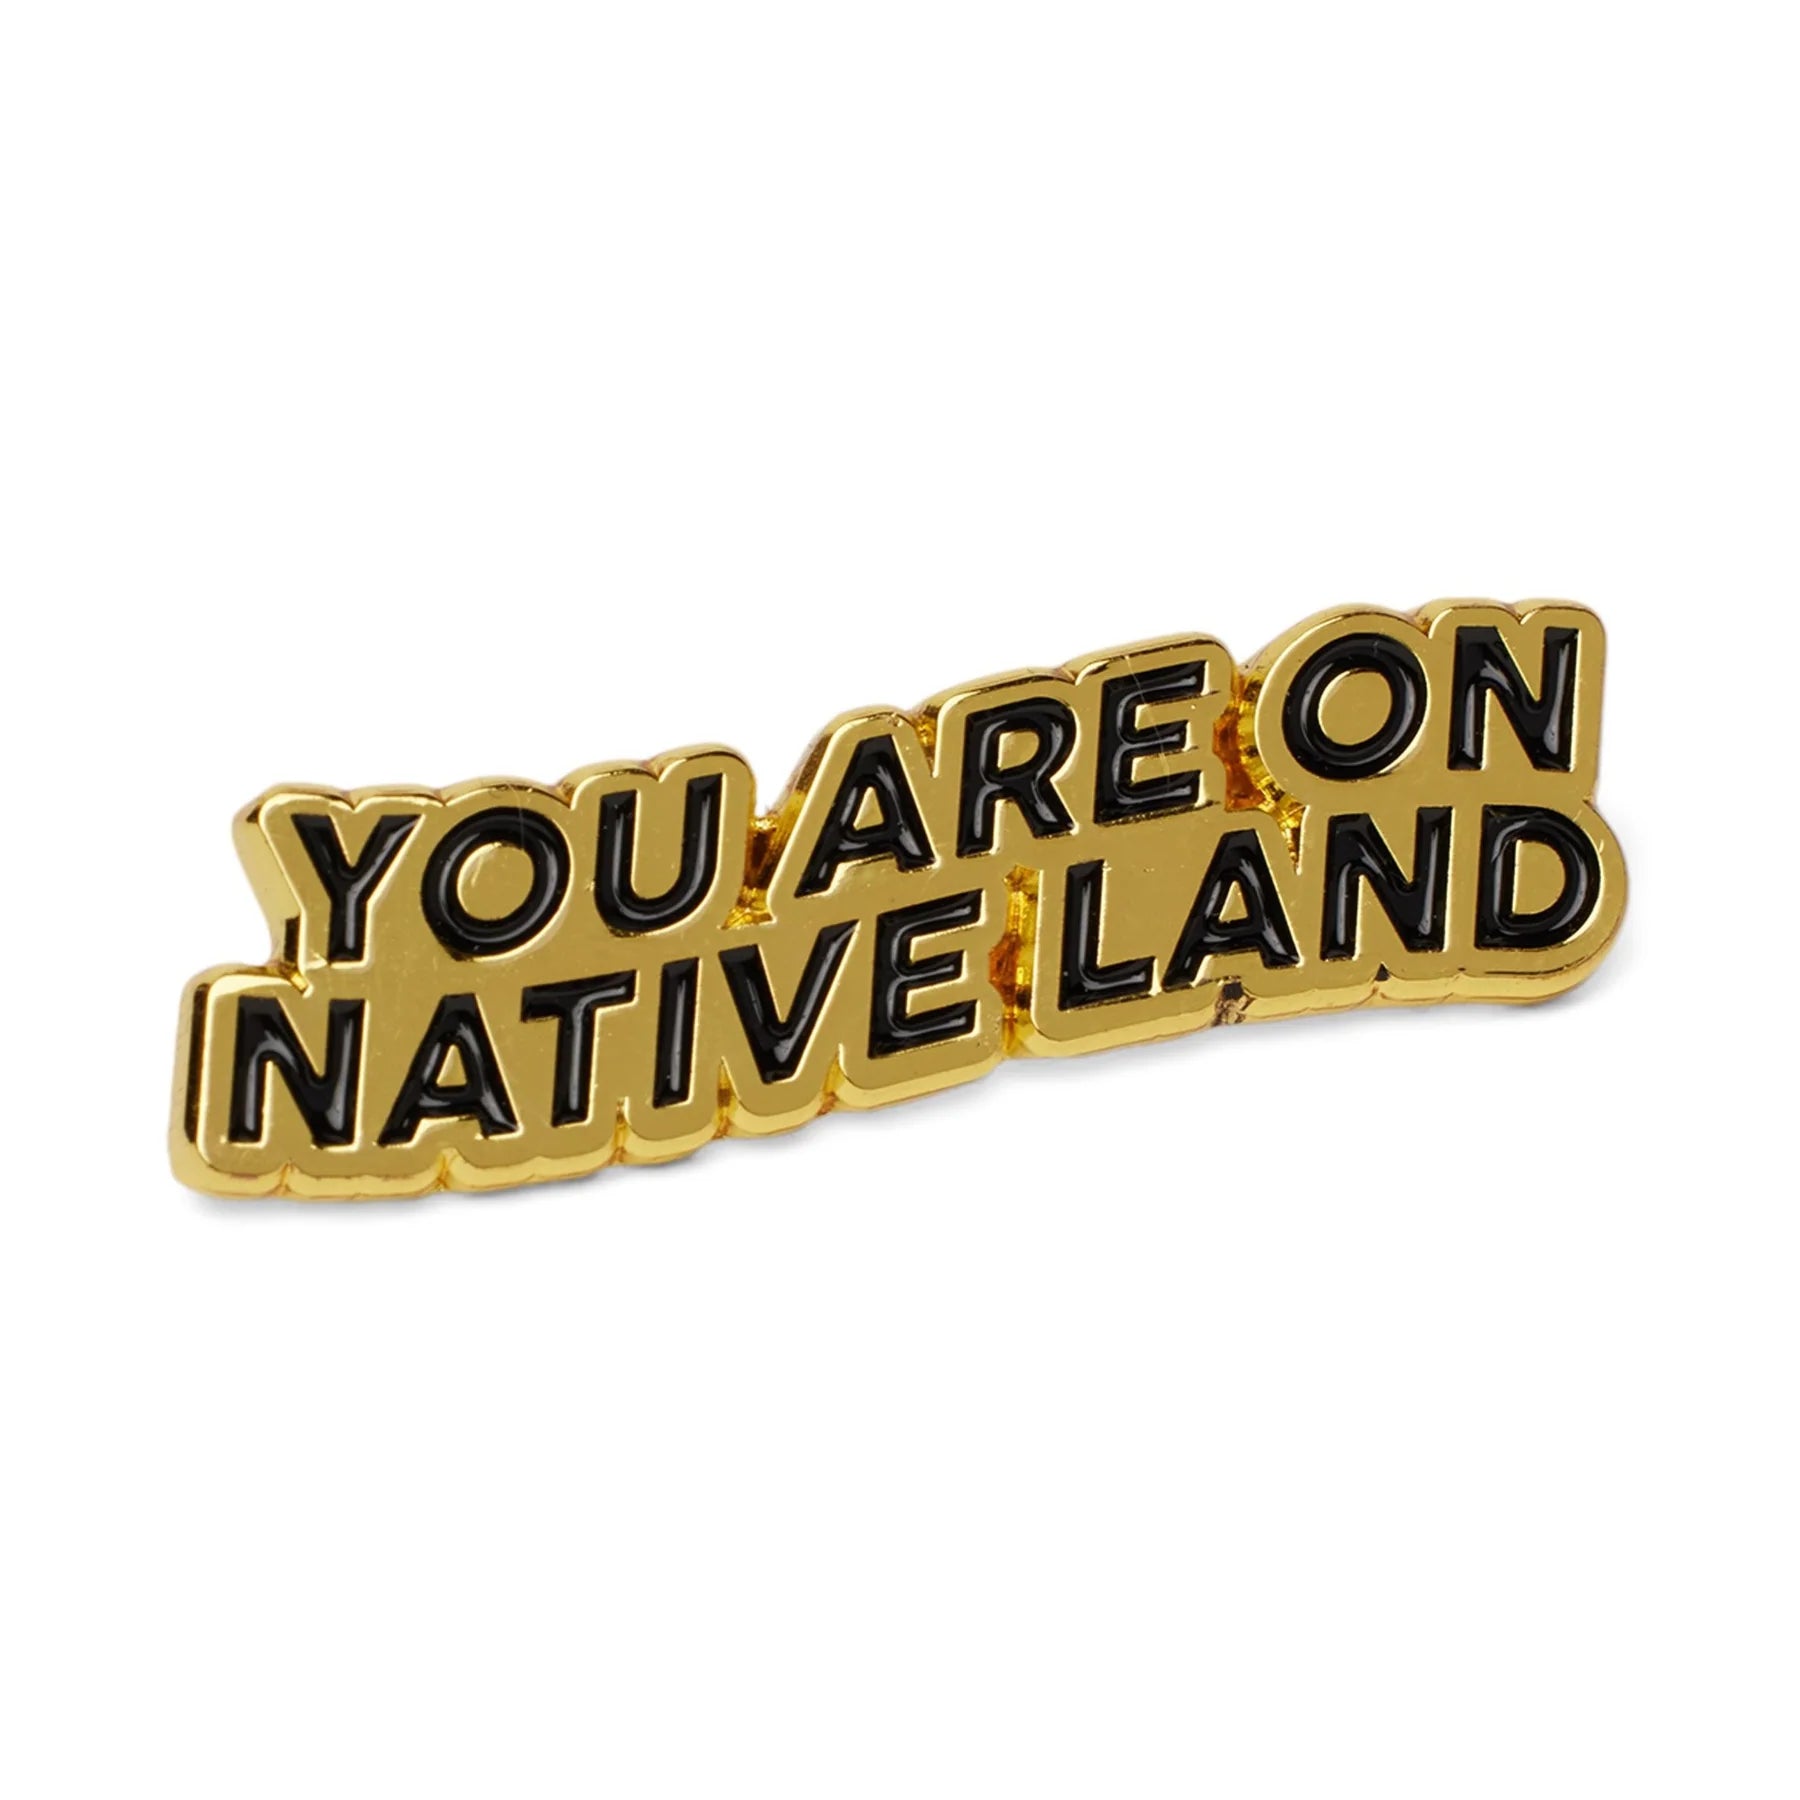 'YOU ARE ON NATIVE LAND' Pin